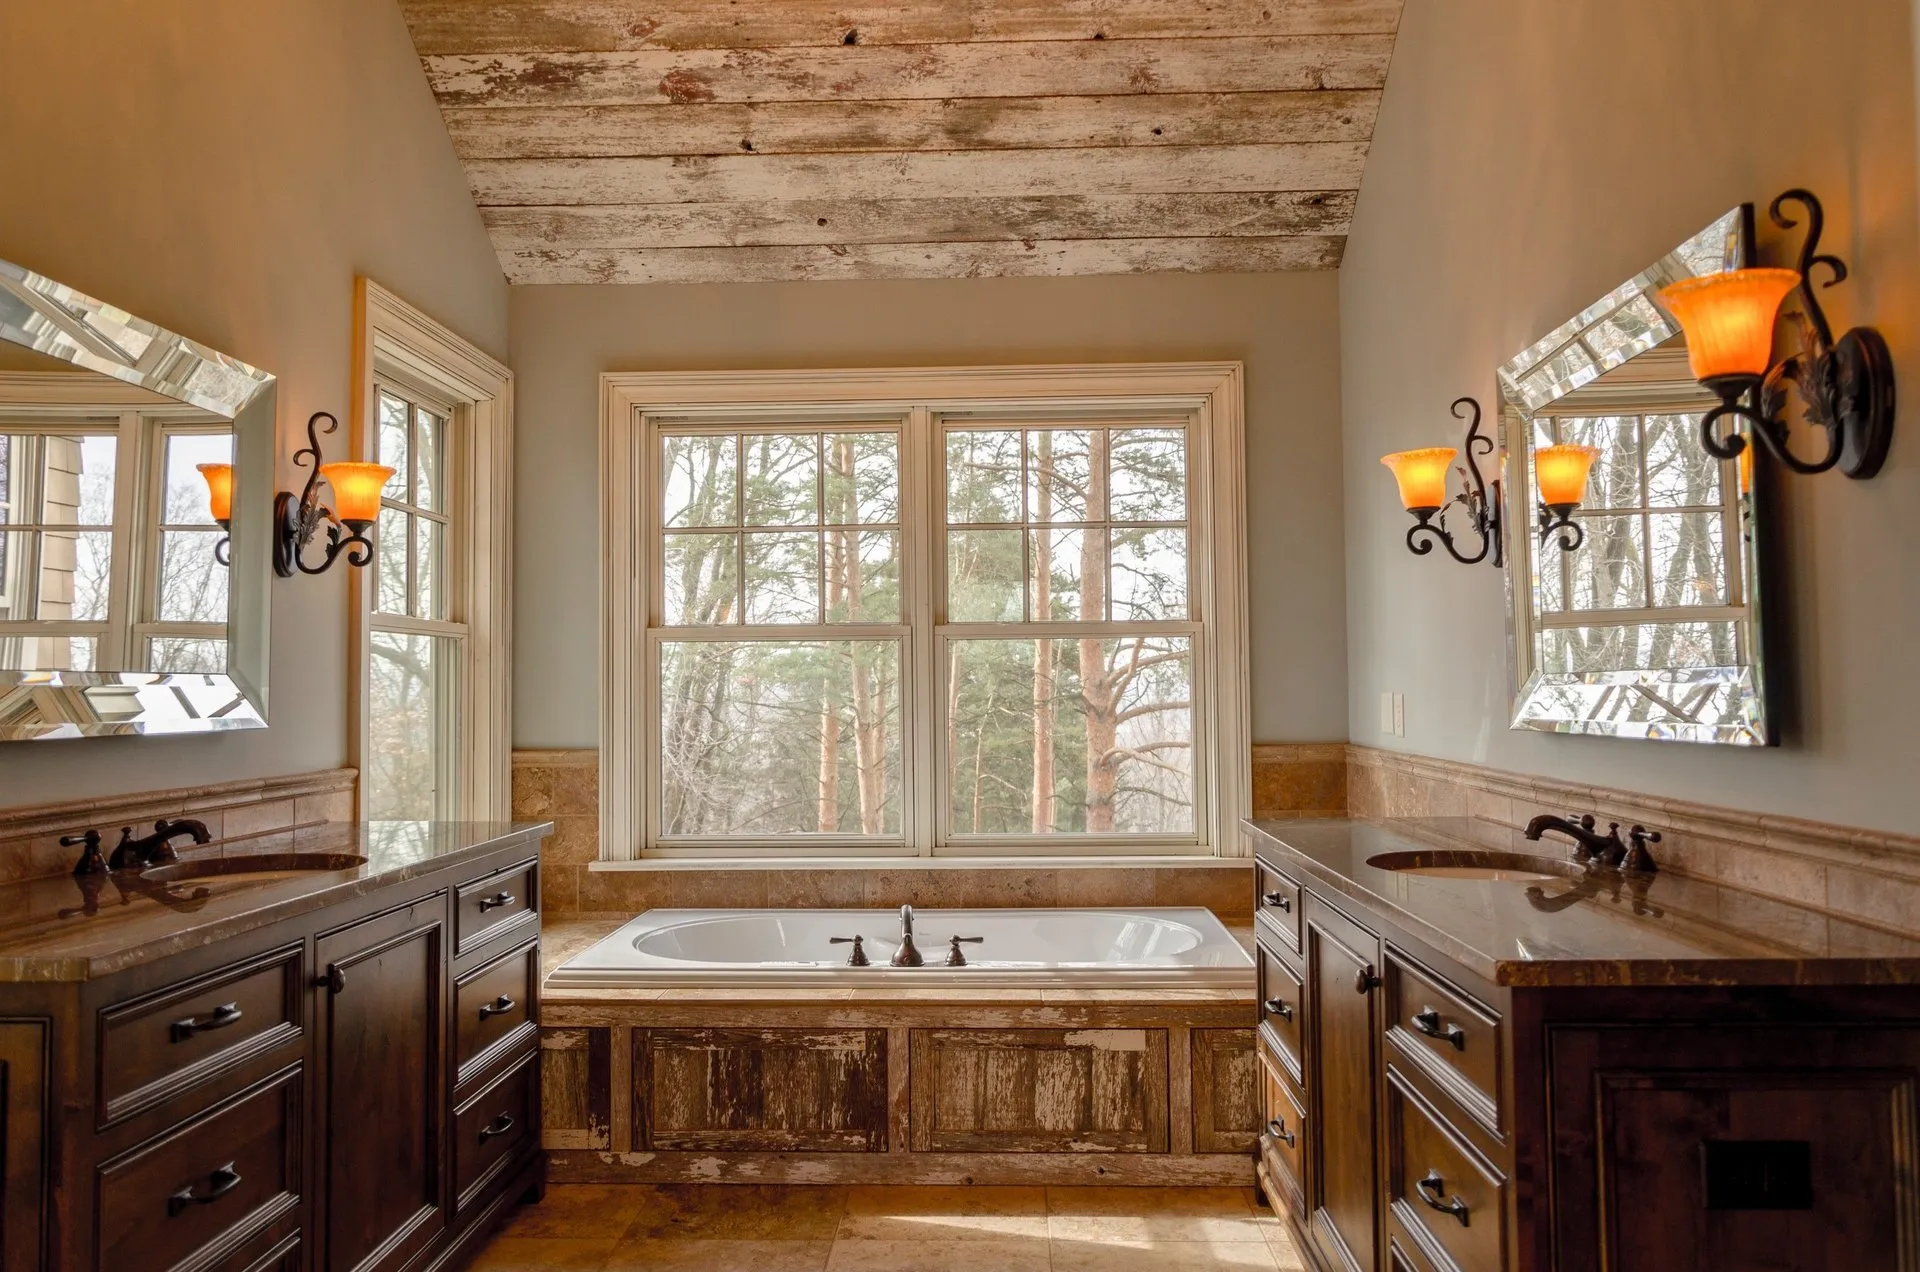 Rustic bathroom with full tub, two bathroom sink vanities face each other with two matching mirrors above each one. Decorative lighting fixtures hang on either side of both mirrors.